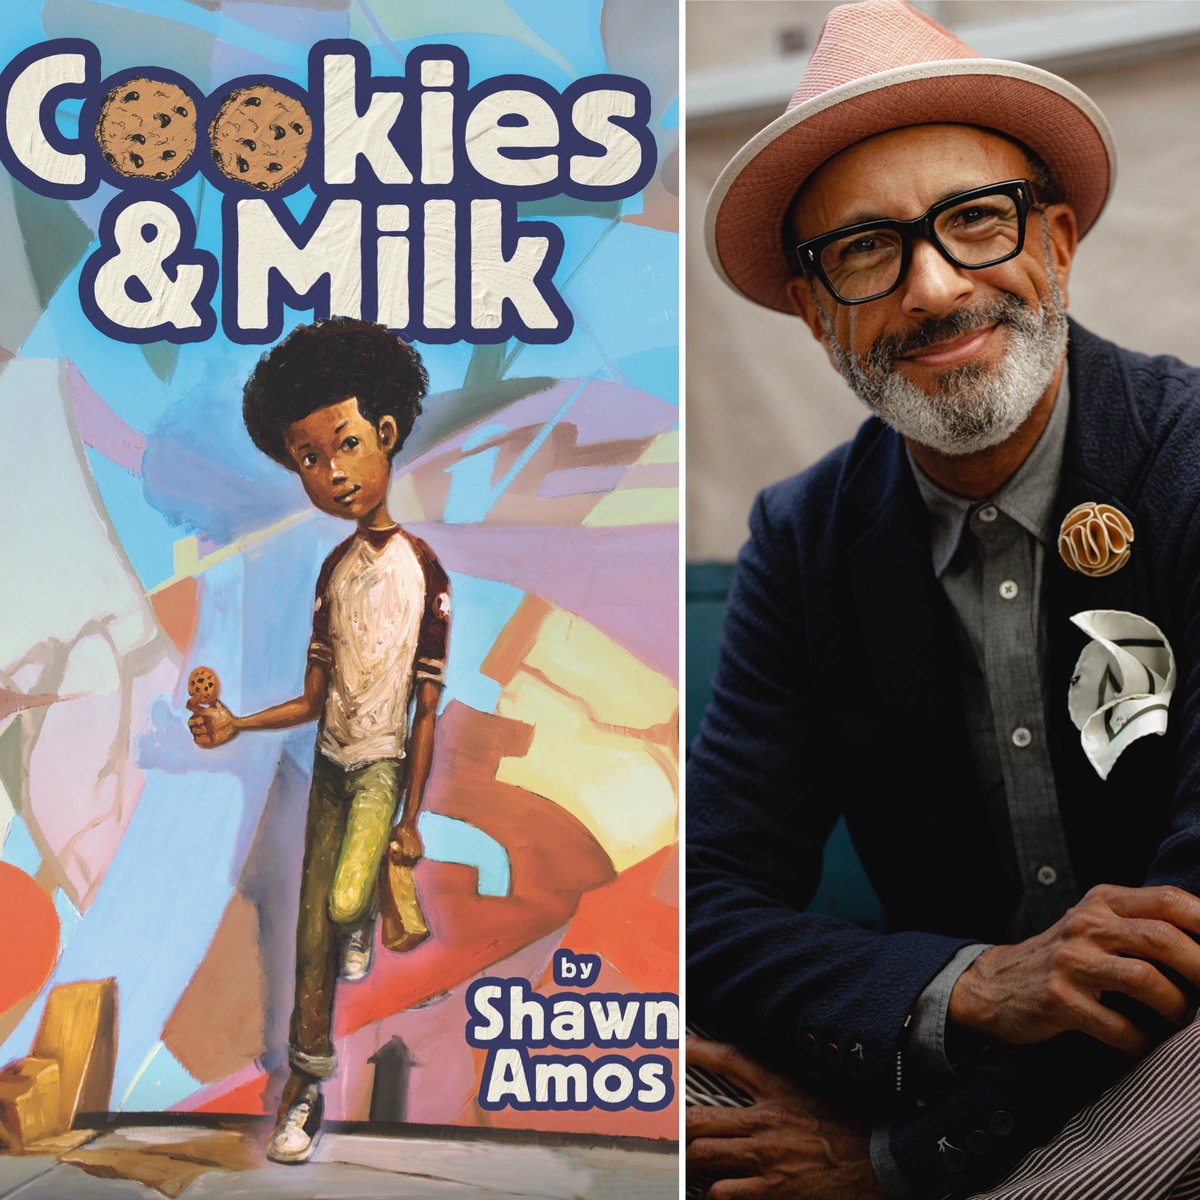 Join us tomorrow at 2pm for an exciting author event! World renowned Blues Musician Rev. Shawn Amos, son of Wally “Famous” Amos will be in our store for a signing and reading of his debut novel #cookiesandmilk! #bnfrisco #authorevent #booksigning #friscxotx #famousamos